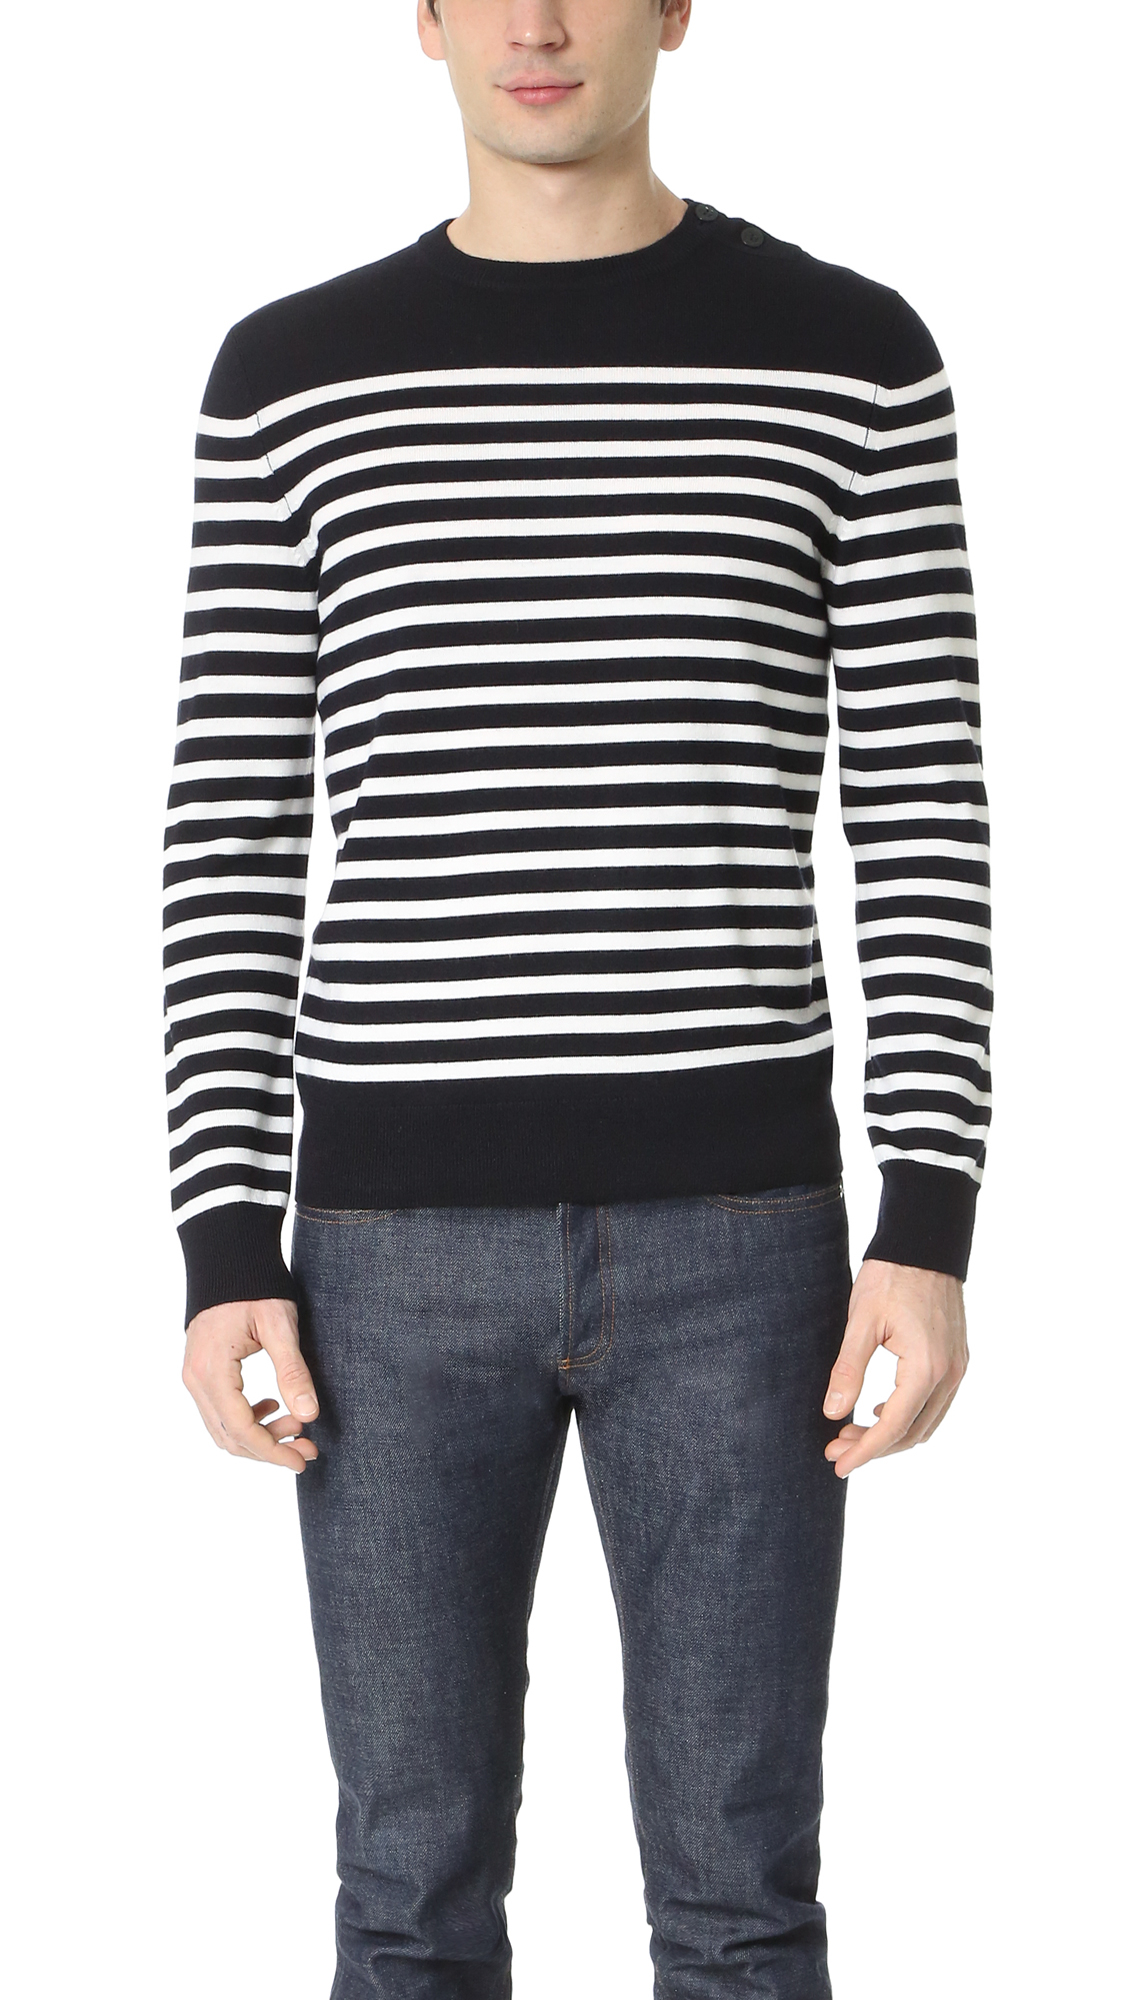 Lyst - A.P.C. Captain Sweater in Blue for Men